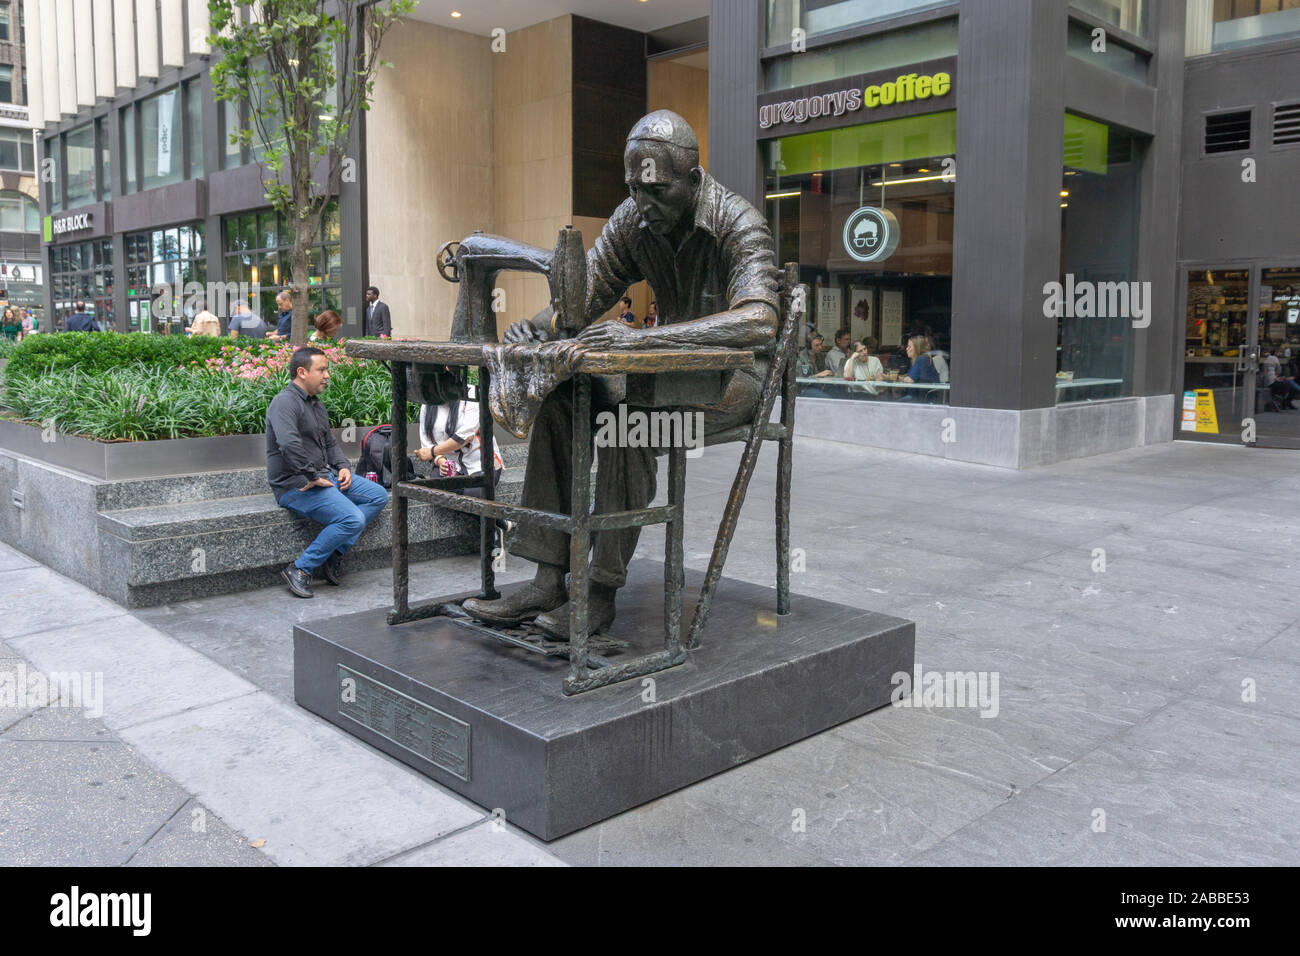 'The Garment Worker by JUDITH WELLER is a sculpture located at 555 Seventh Avenue (also known as Fashion Avenue) in Stock Photo